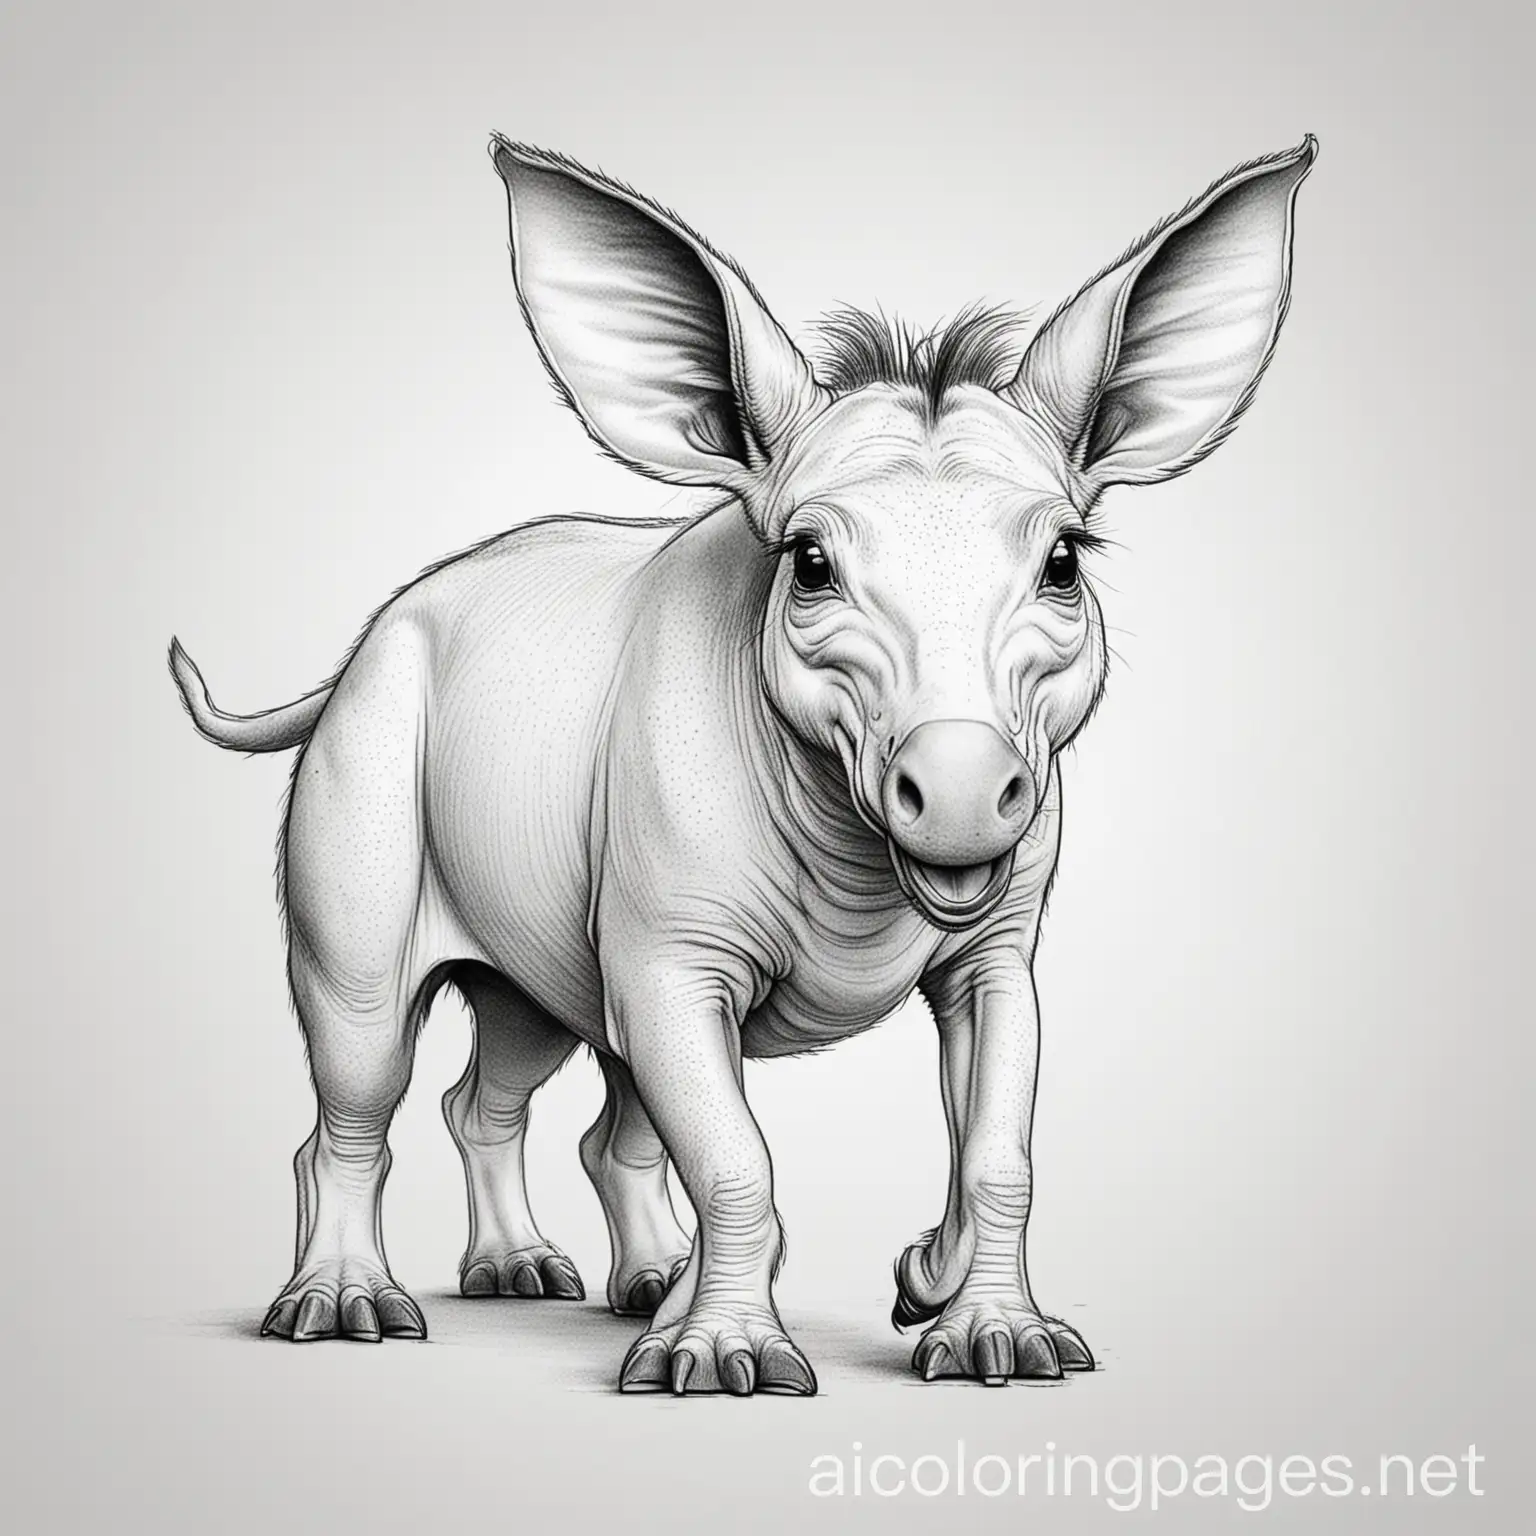 Happy aardvark, Coloring Page, black and white, line art, white background, Simplicity, Ample White Space. The background of the coloring page is plain white to make it easy for young children to color within the lines. The outlines of all the subjects are easy to distinguish, making it simple for kids to color without too much difficulty